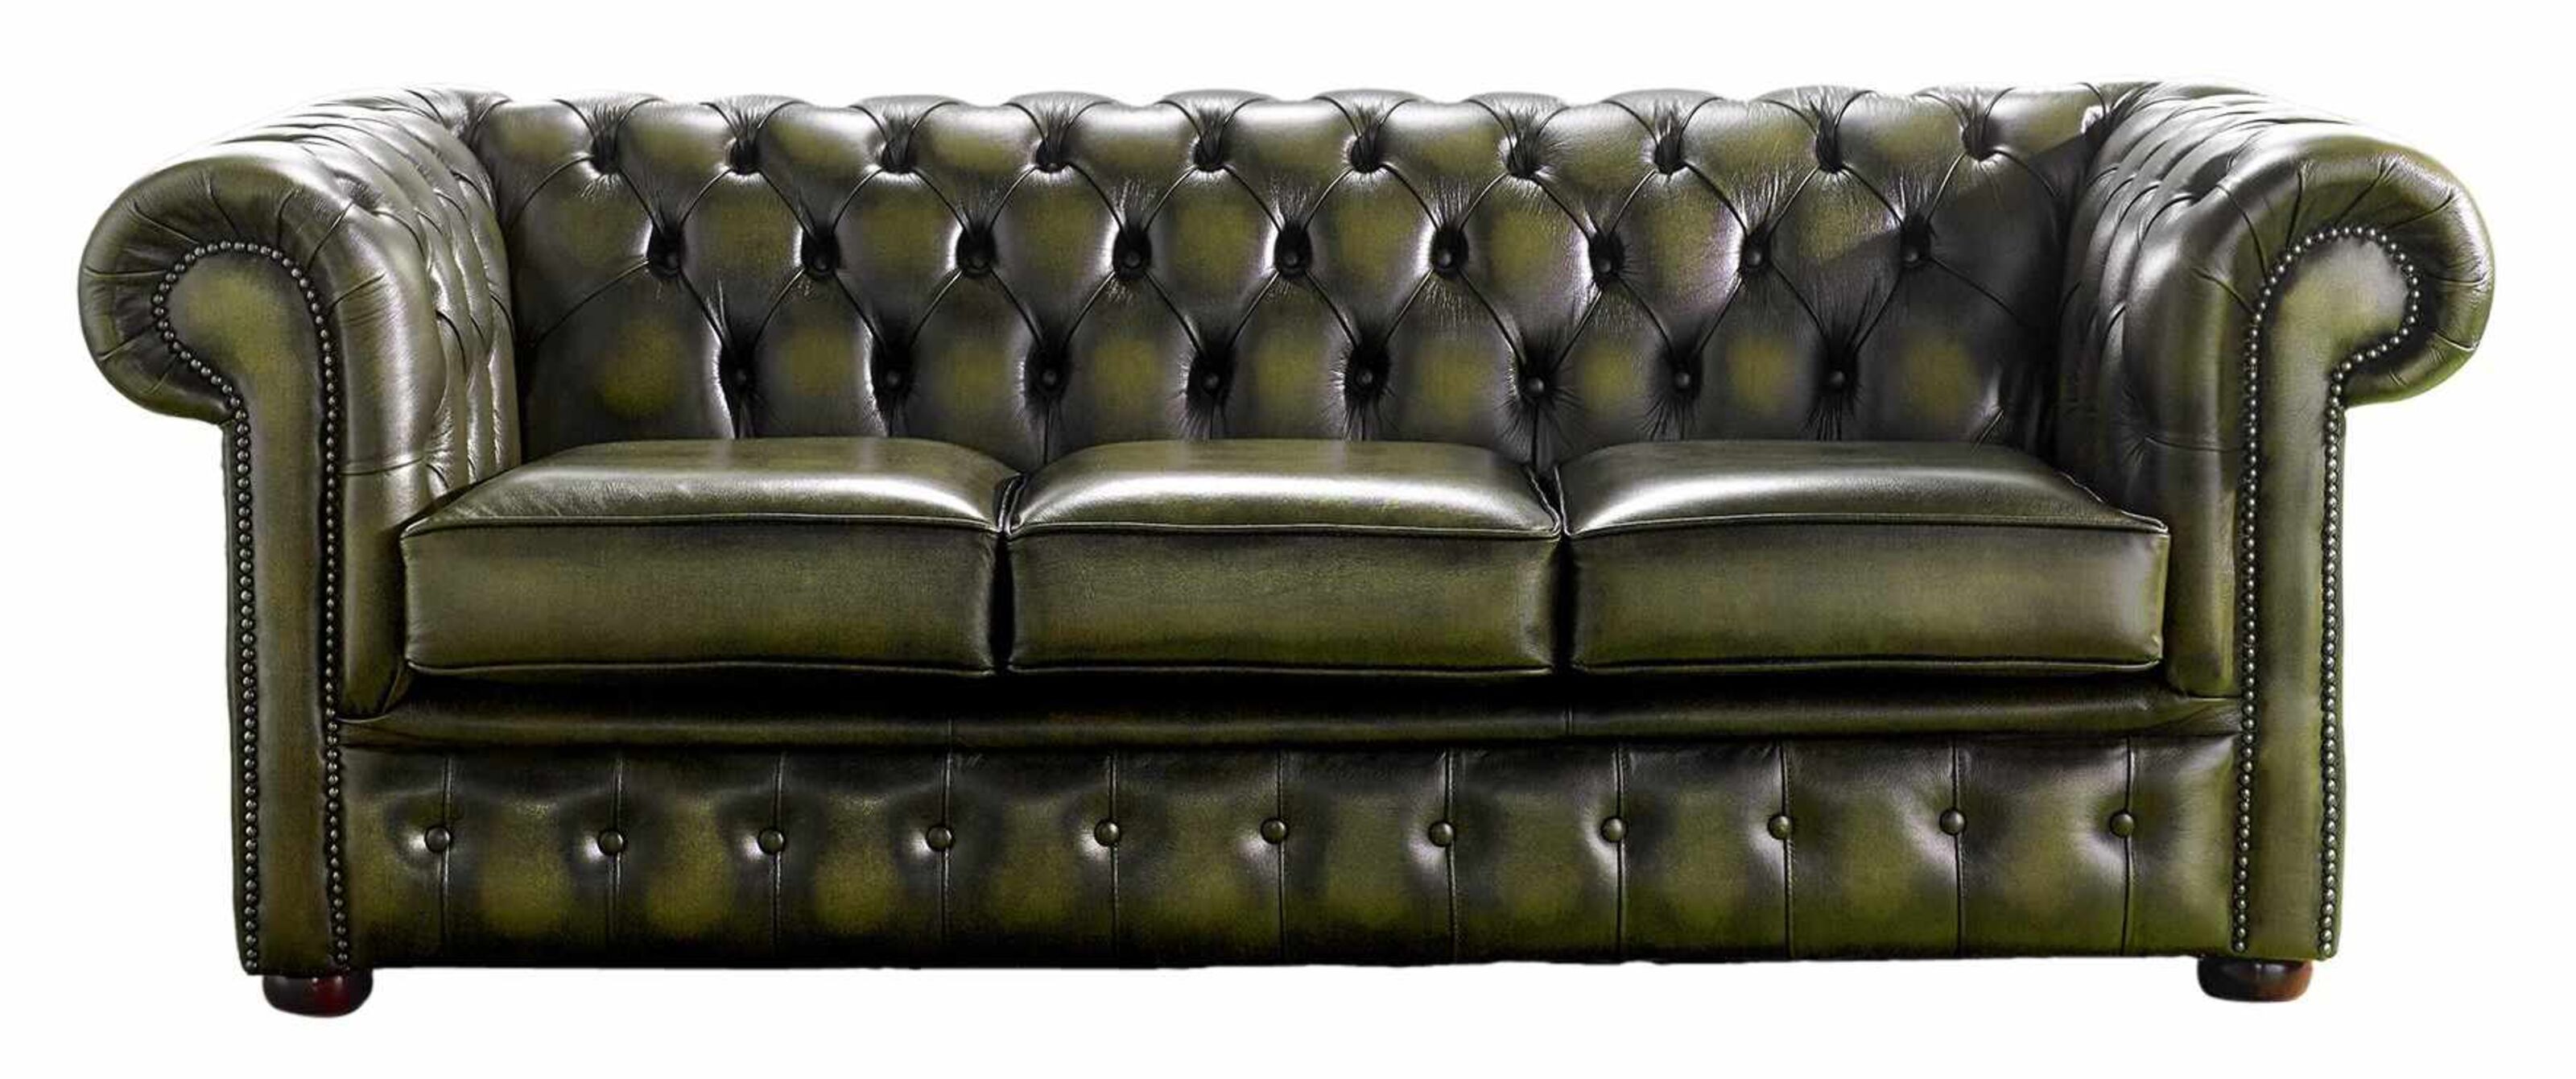 Elevate Your Living Space with DFS Chesterfield Sofas  %Post Title